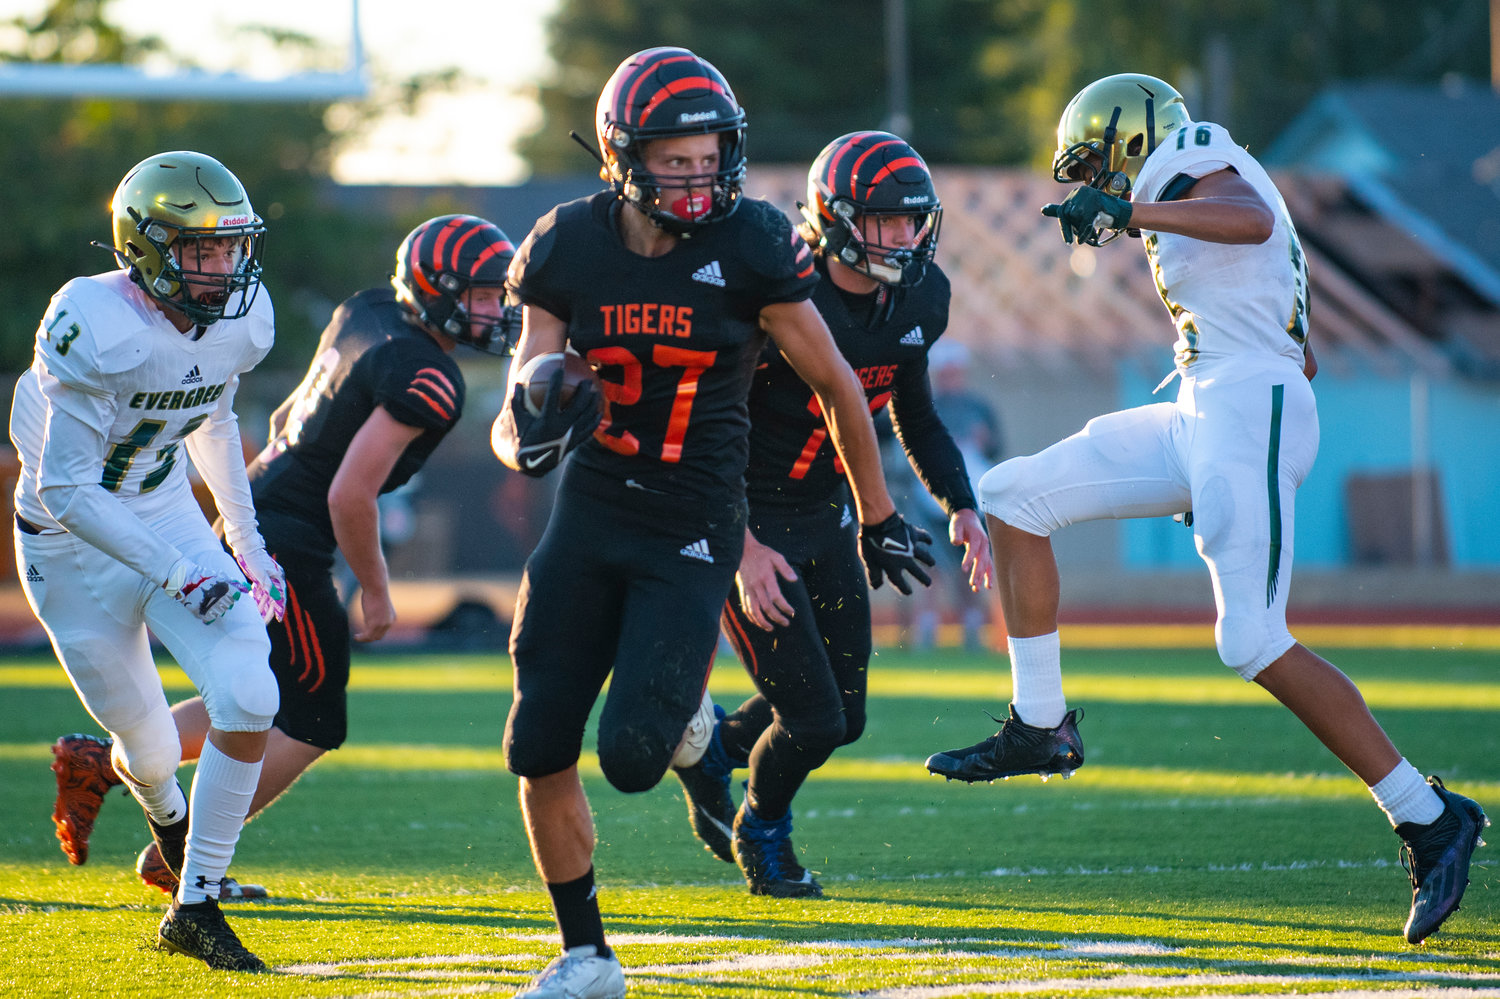 Centralia senior Anthony Saucedo finds an open hole against Evergreen during a season-opening nonleague matchup at home on Friday, Sept. 3.